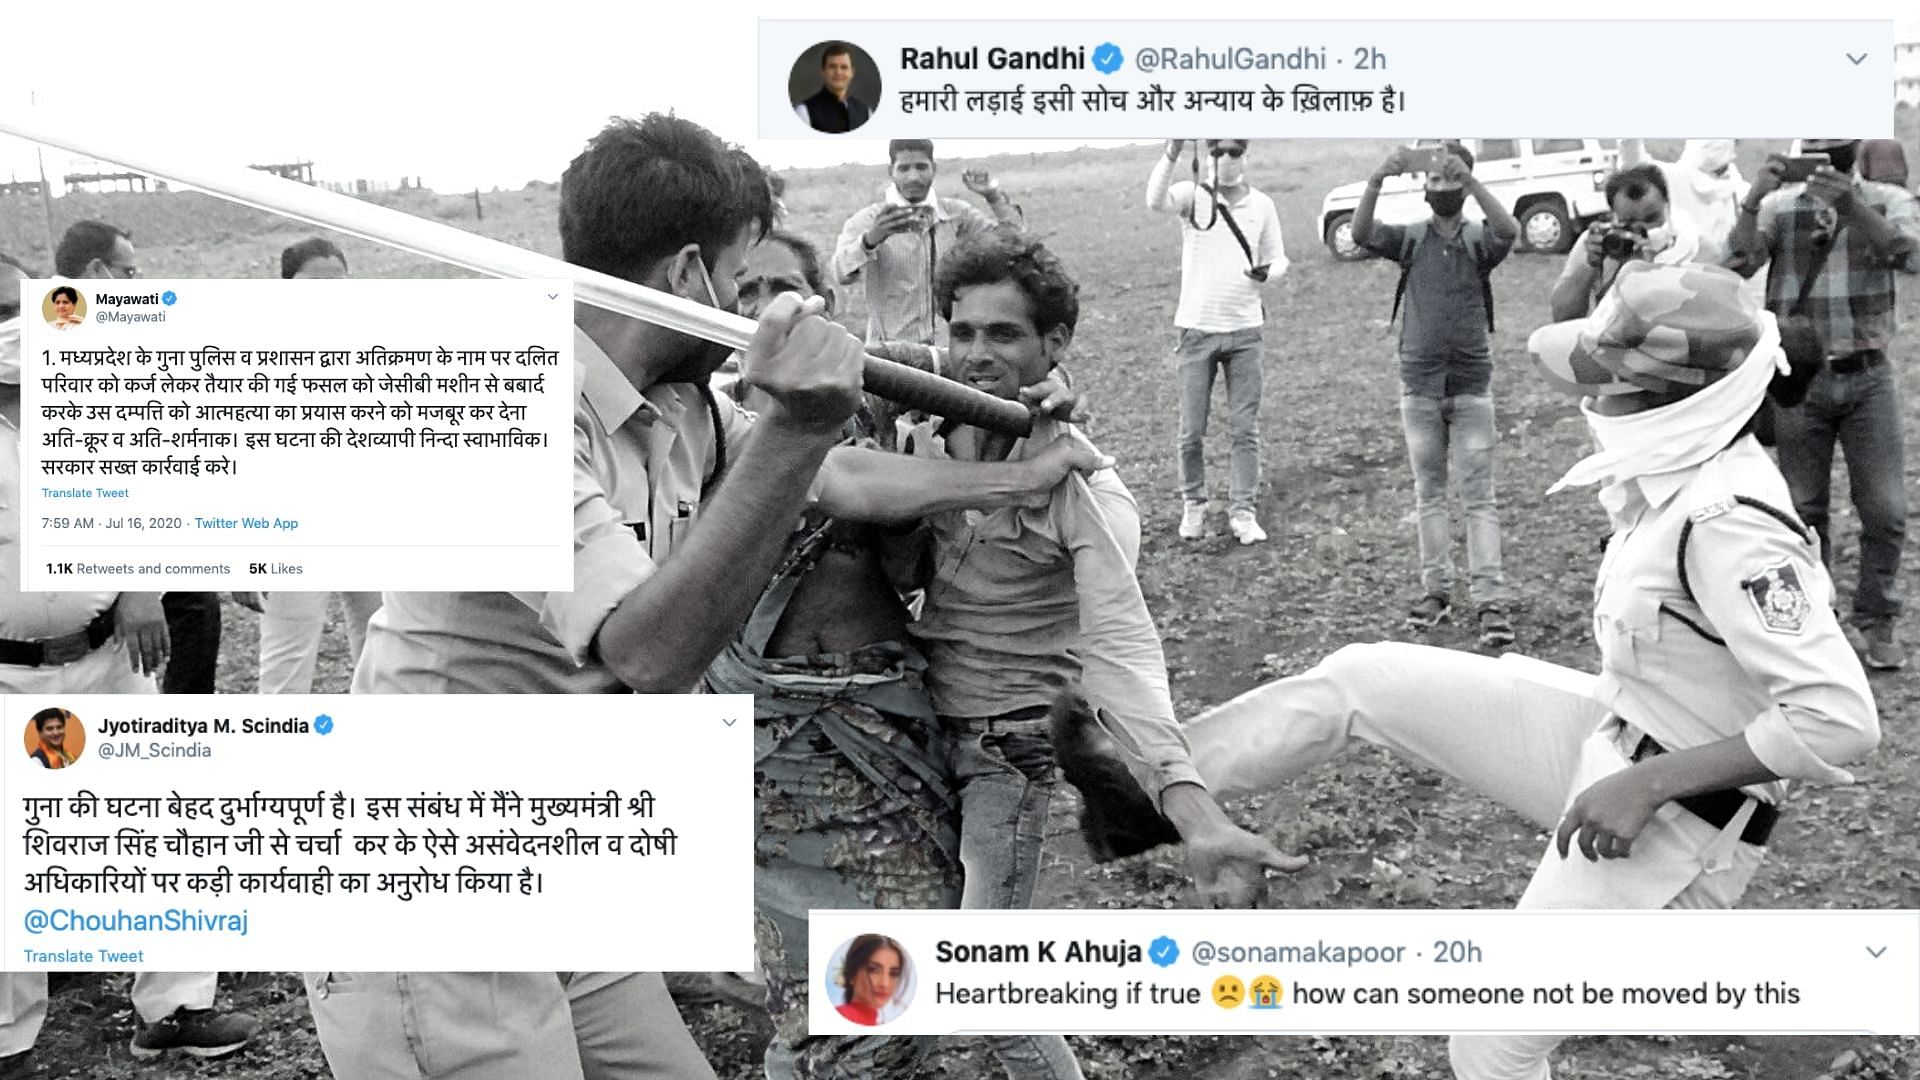 As the videos from and the news of this heartbreaking incident floods social media, various public figures, including Congress Leader Rahul Gandhi and MP JM Scindia have come forward to express dismay.